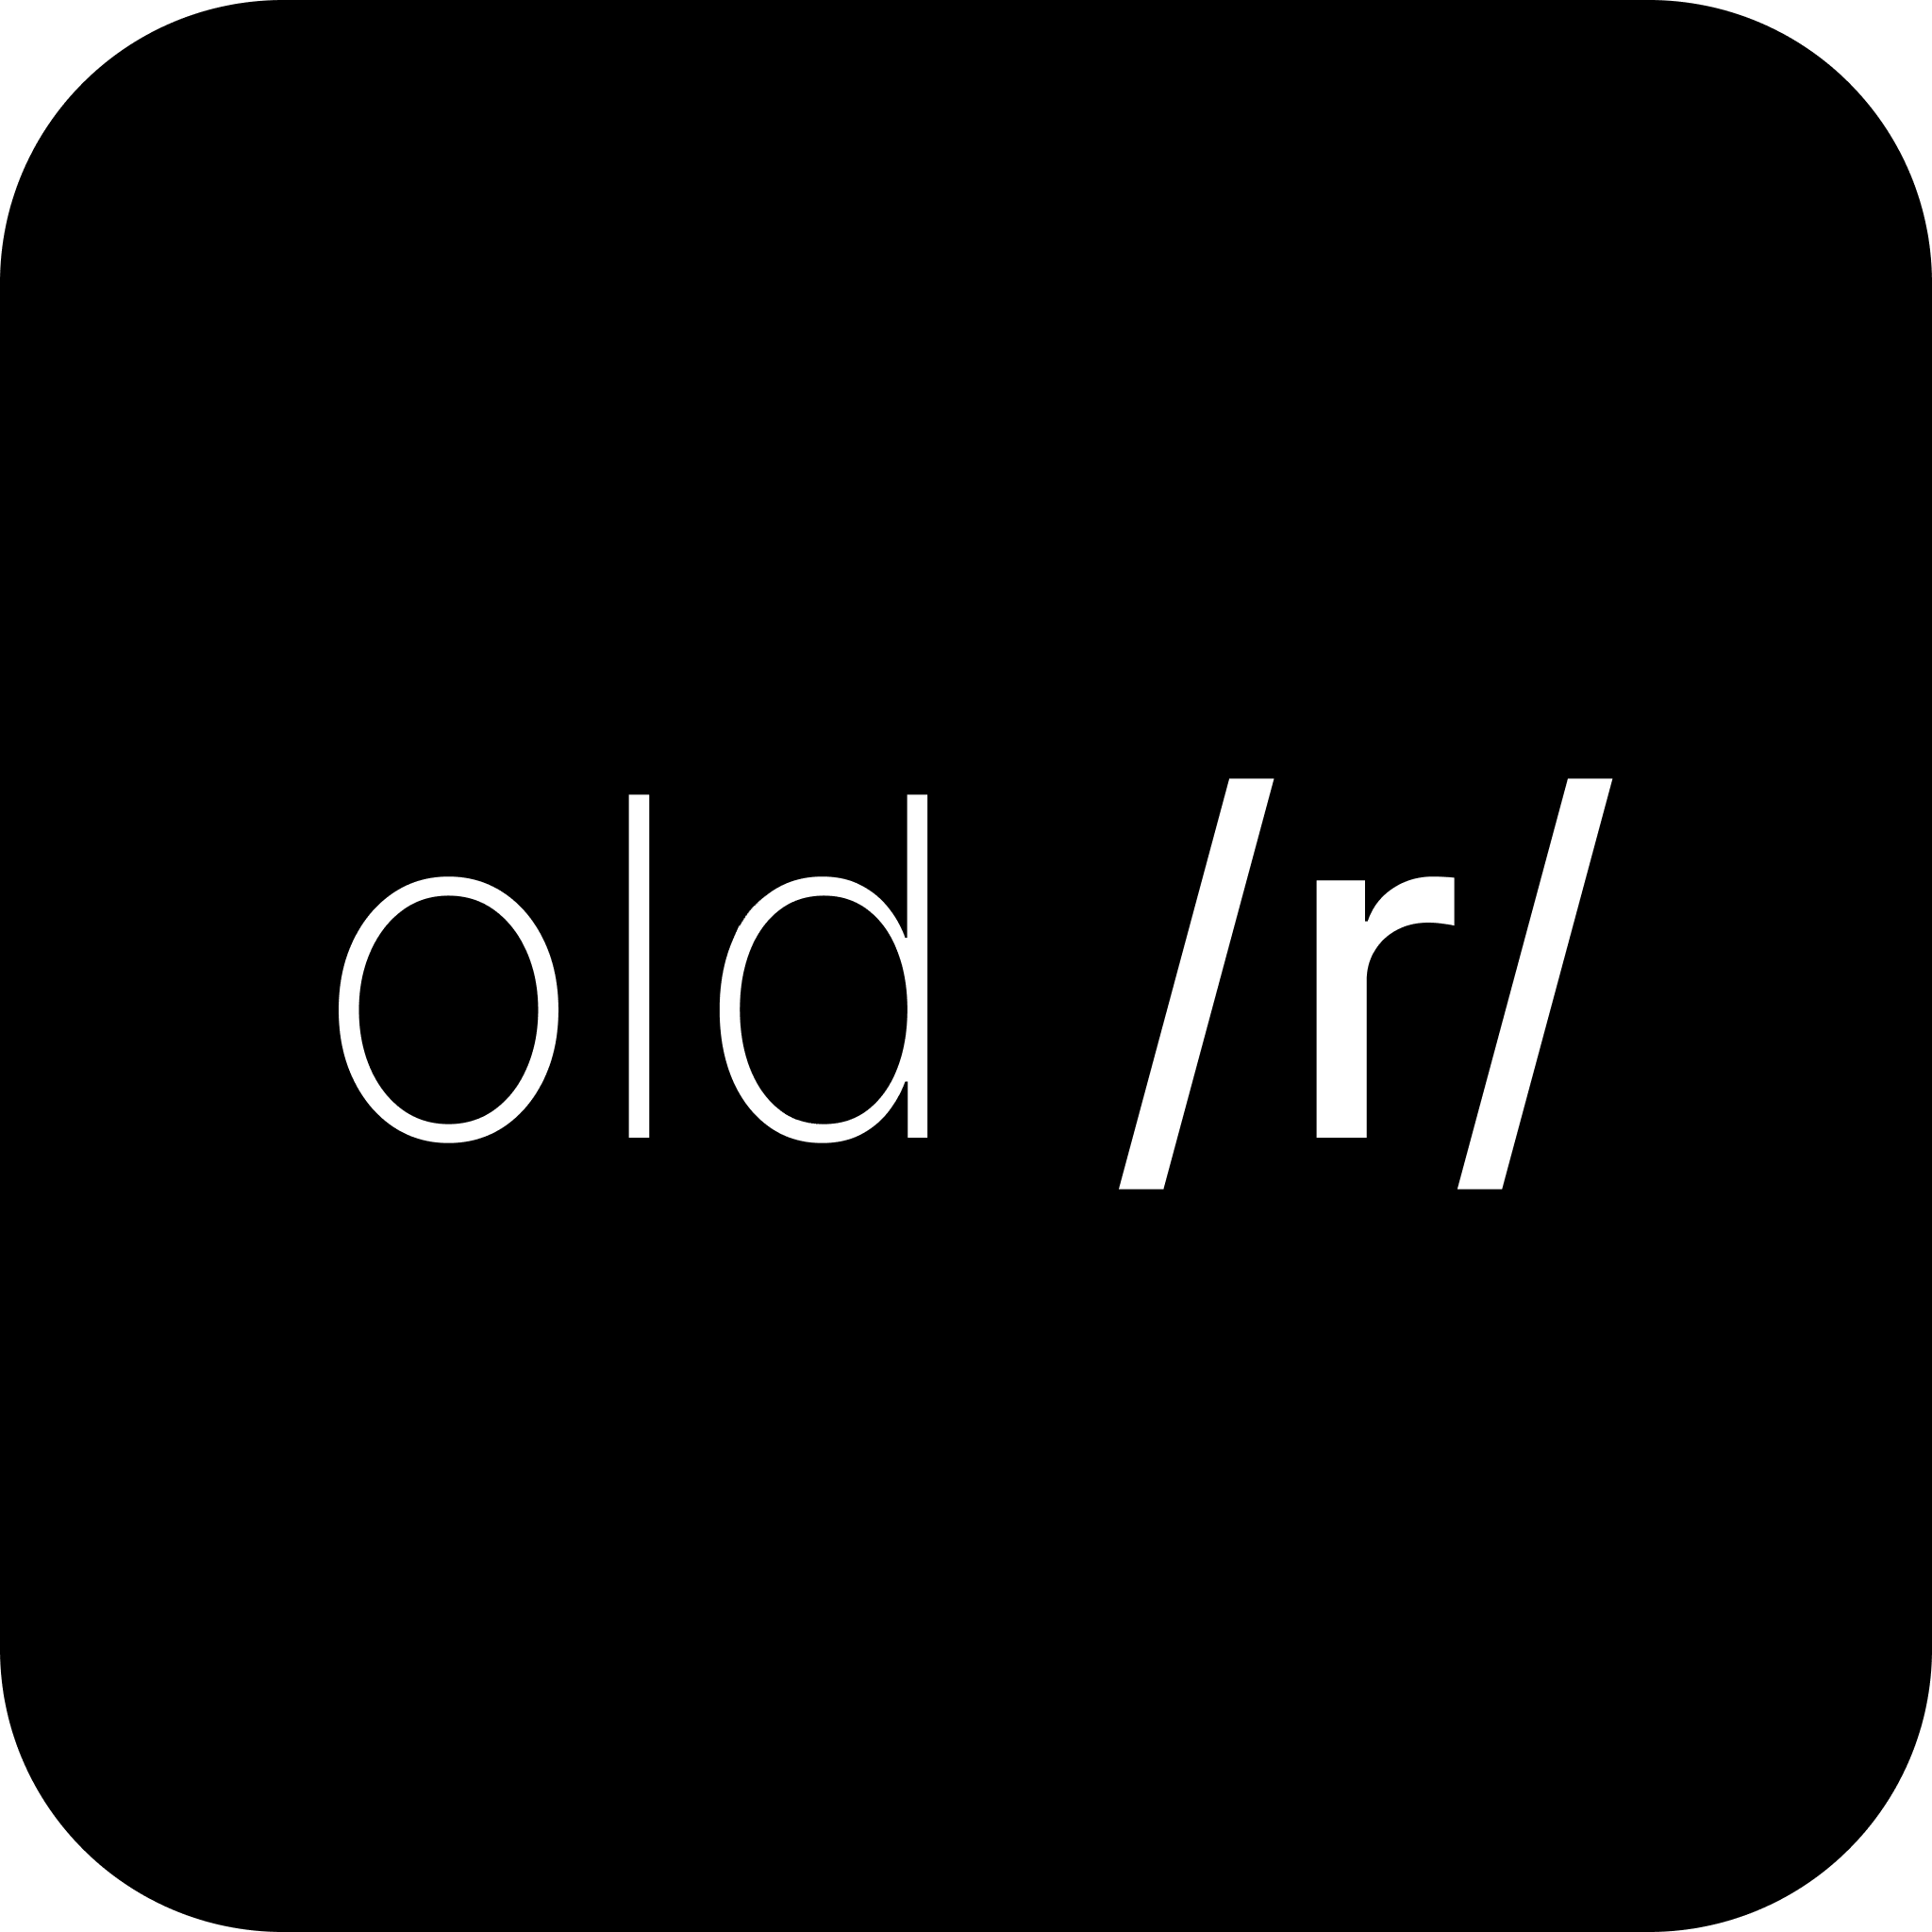 Yesterday For Old Re... logo